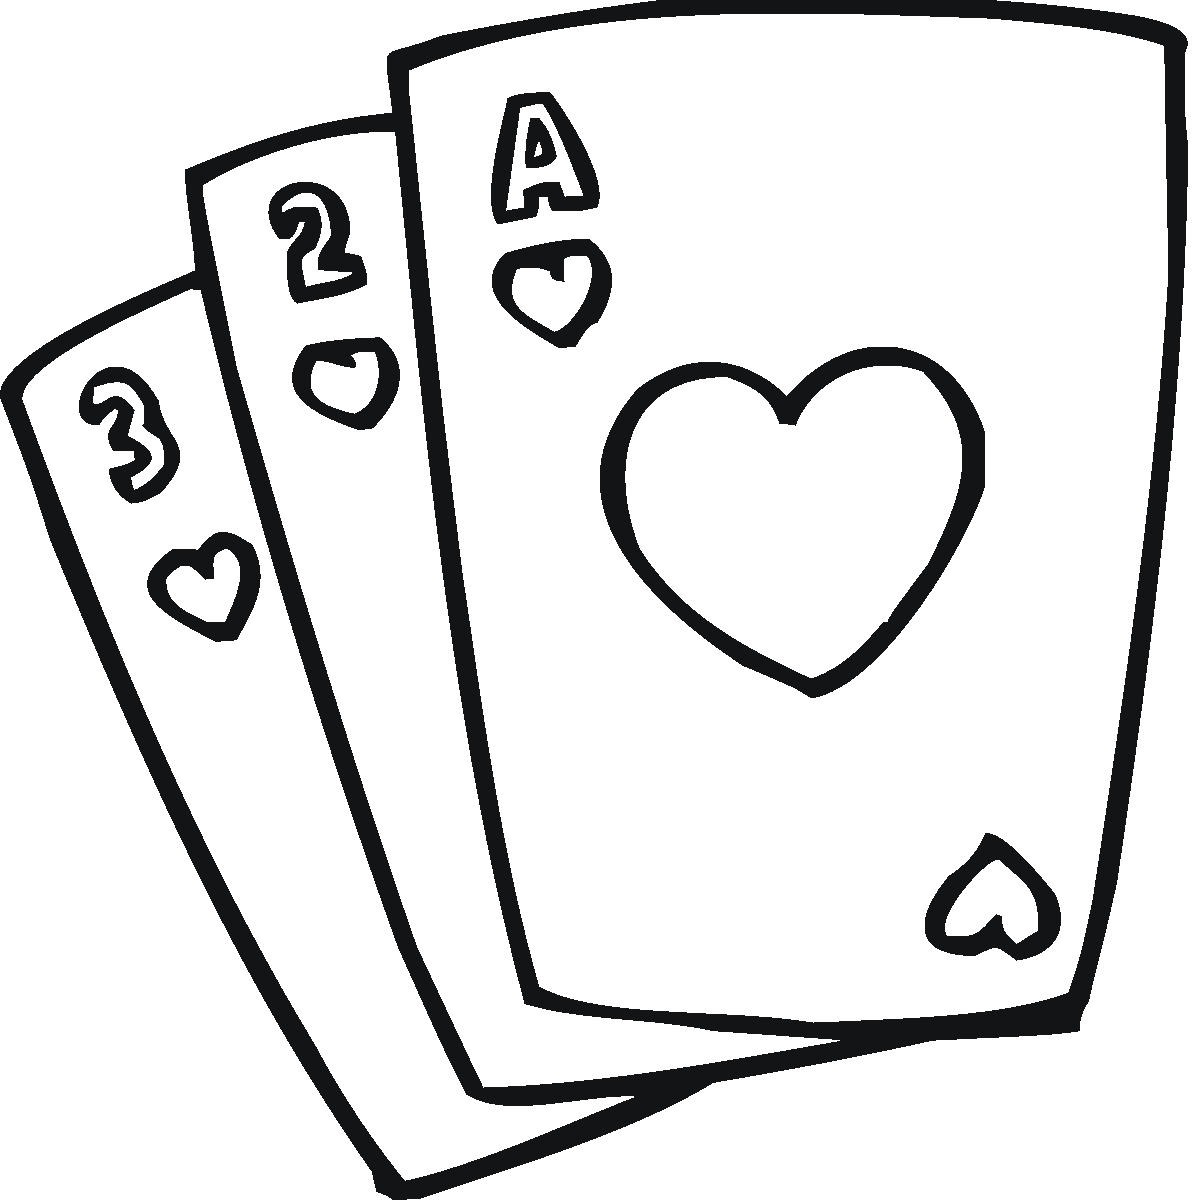 Love Poker Cards Click To View